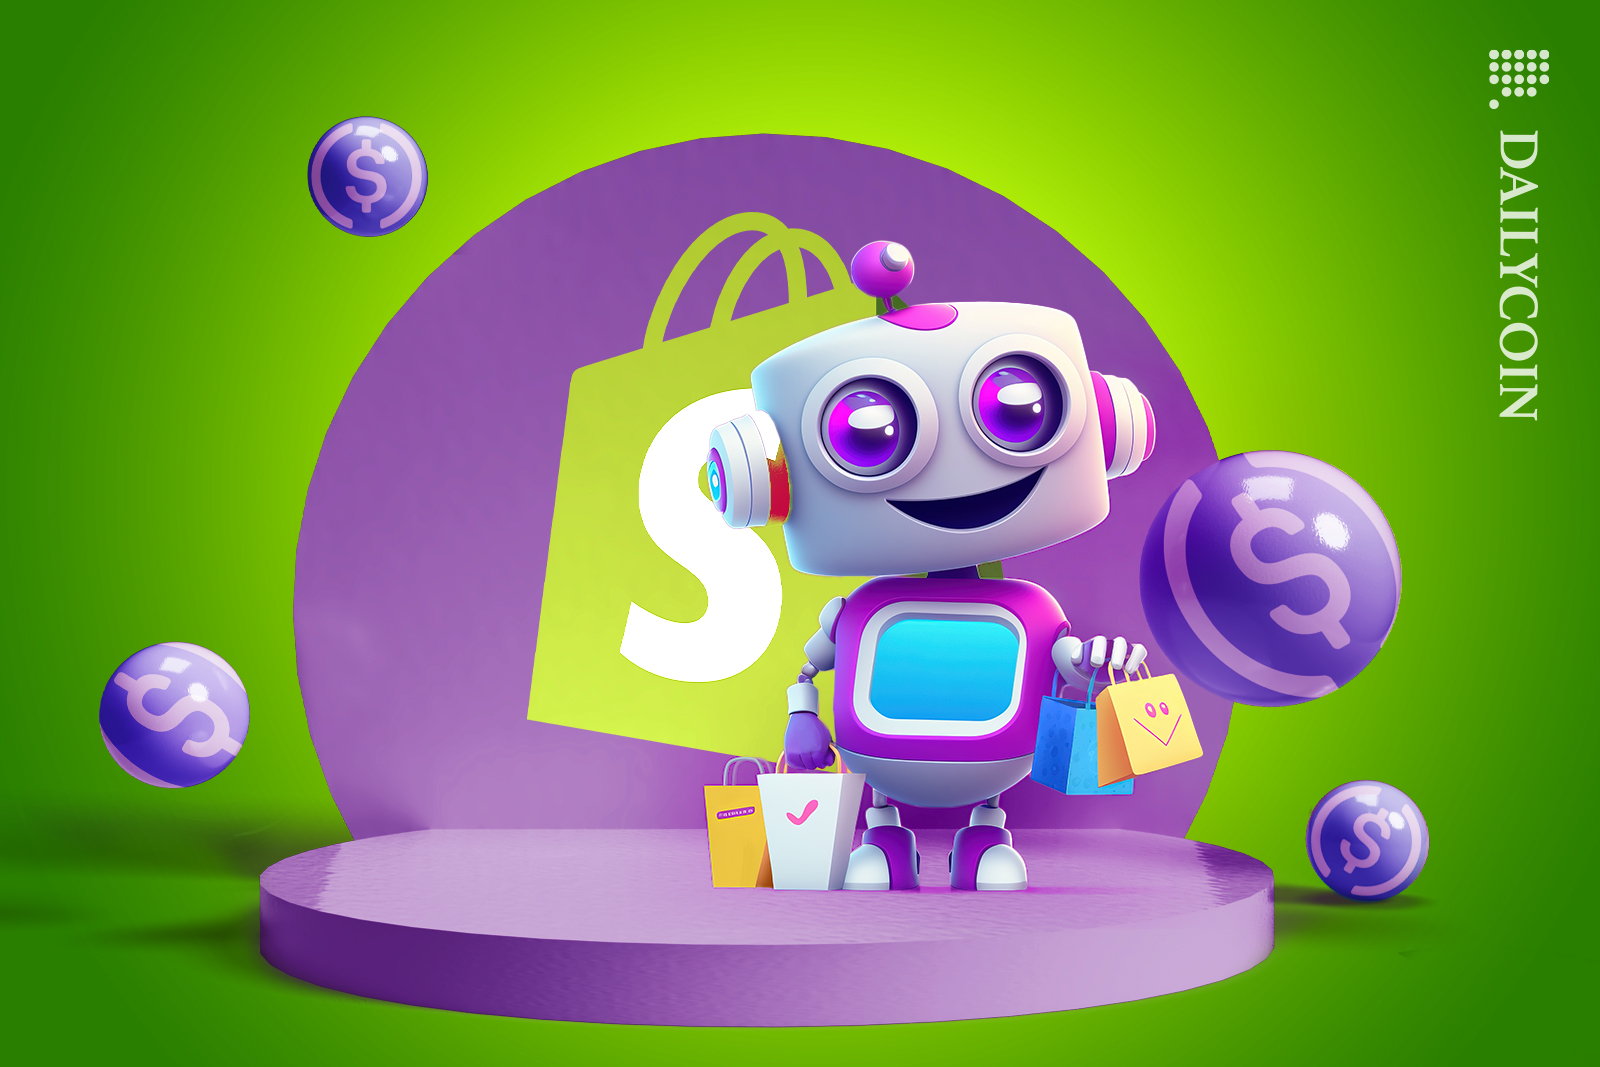 Little robot shopping on shopify platform that has USDC.